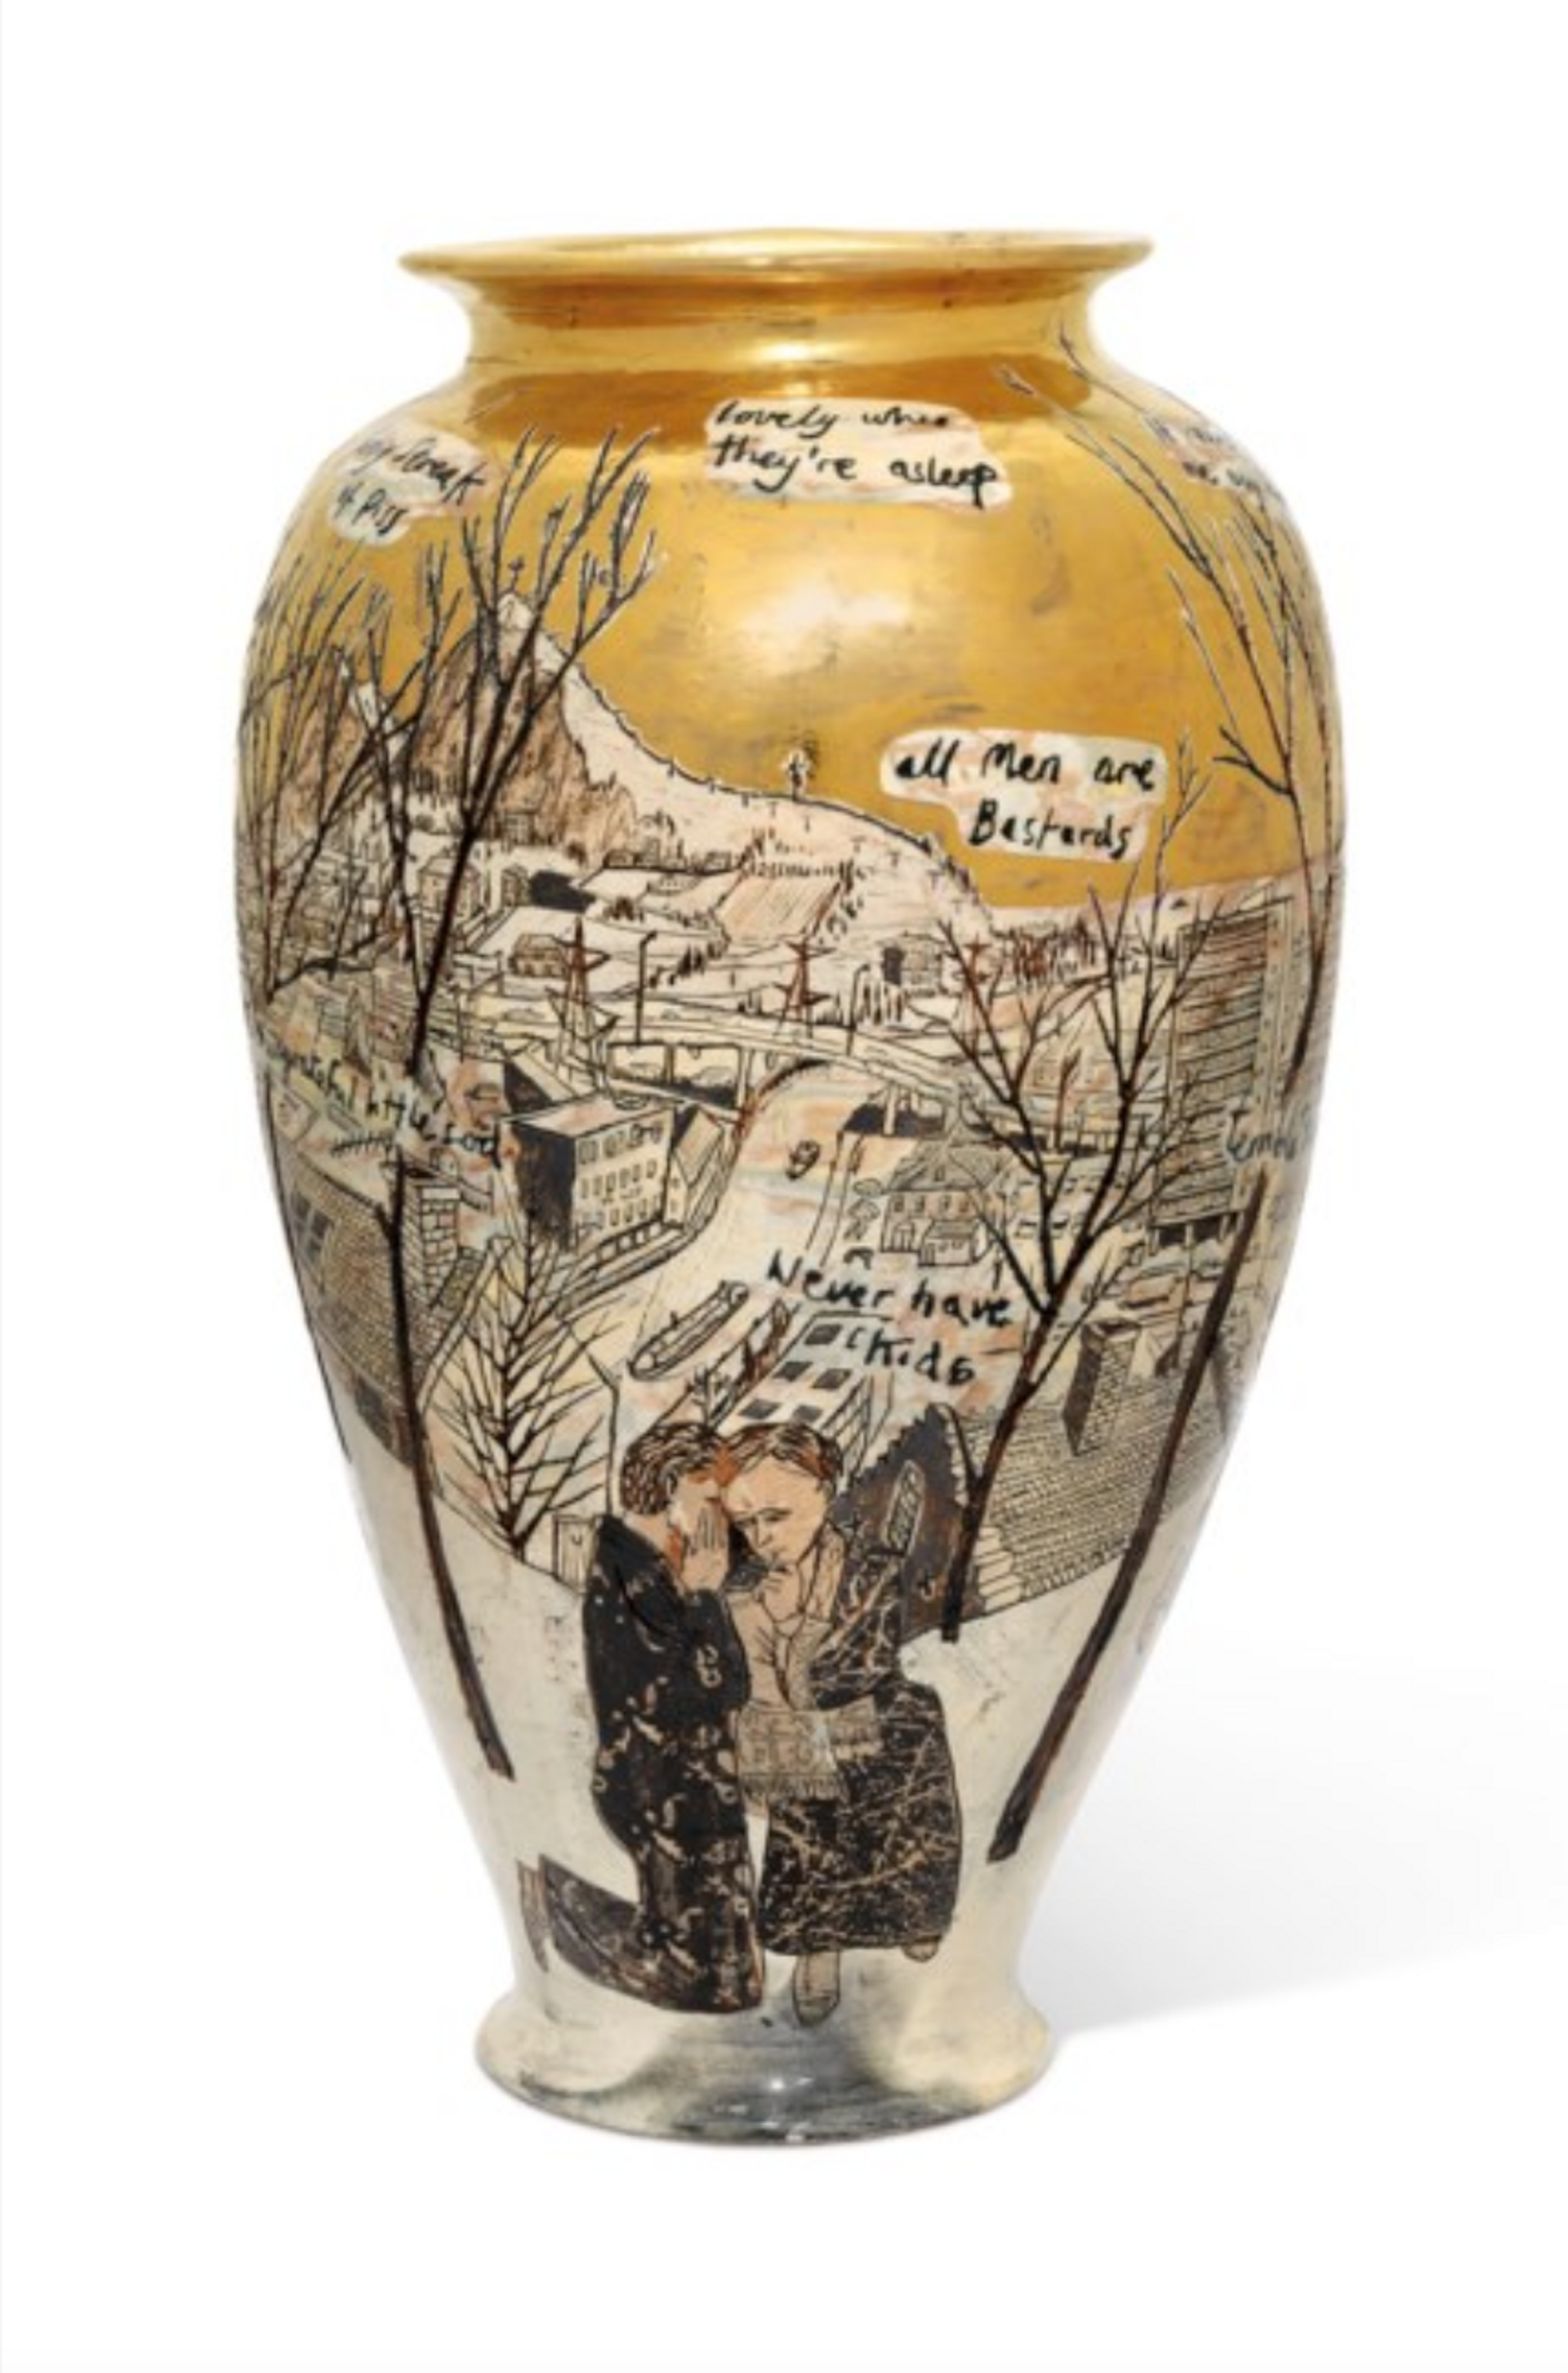 We've Found The Body Of Your Child by Grayson Perry